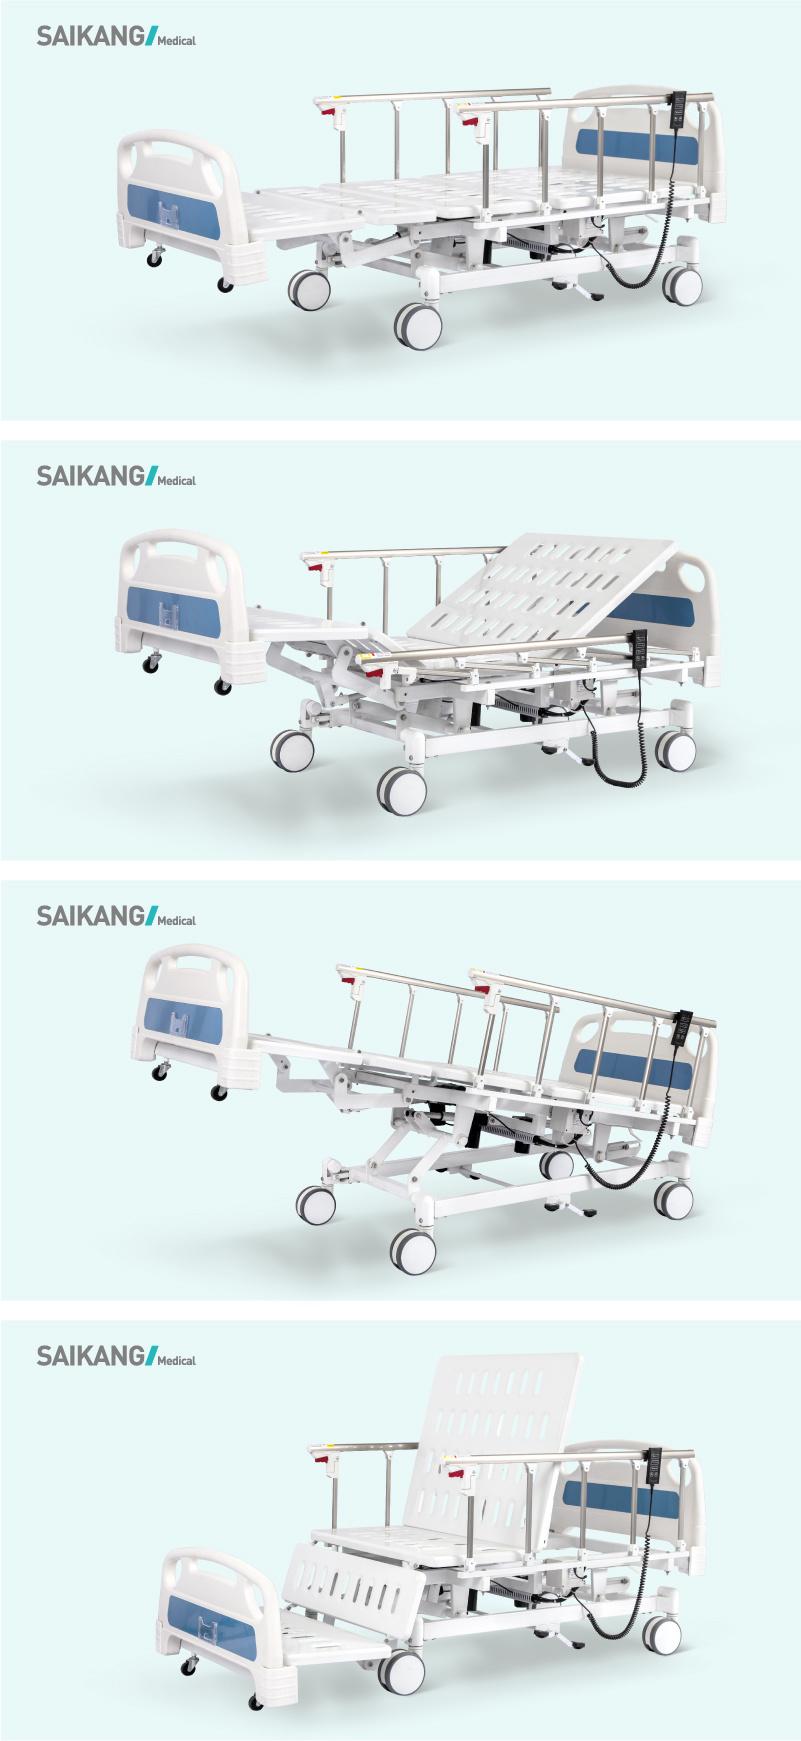 Sk005-2 Hospital Relectric Bed, Recliner Chair Bed, Hospital Furniture